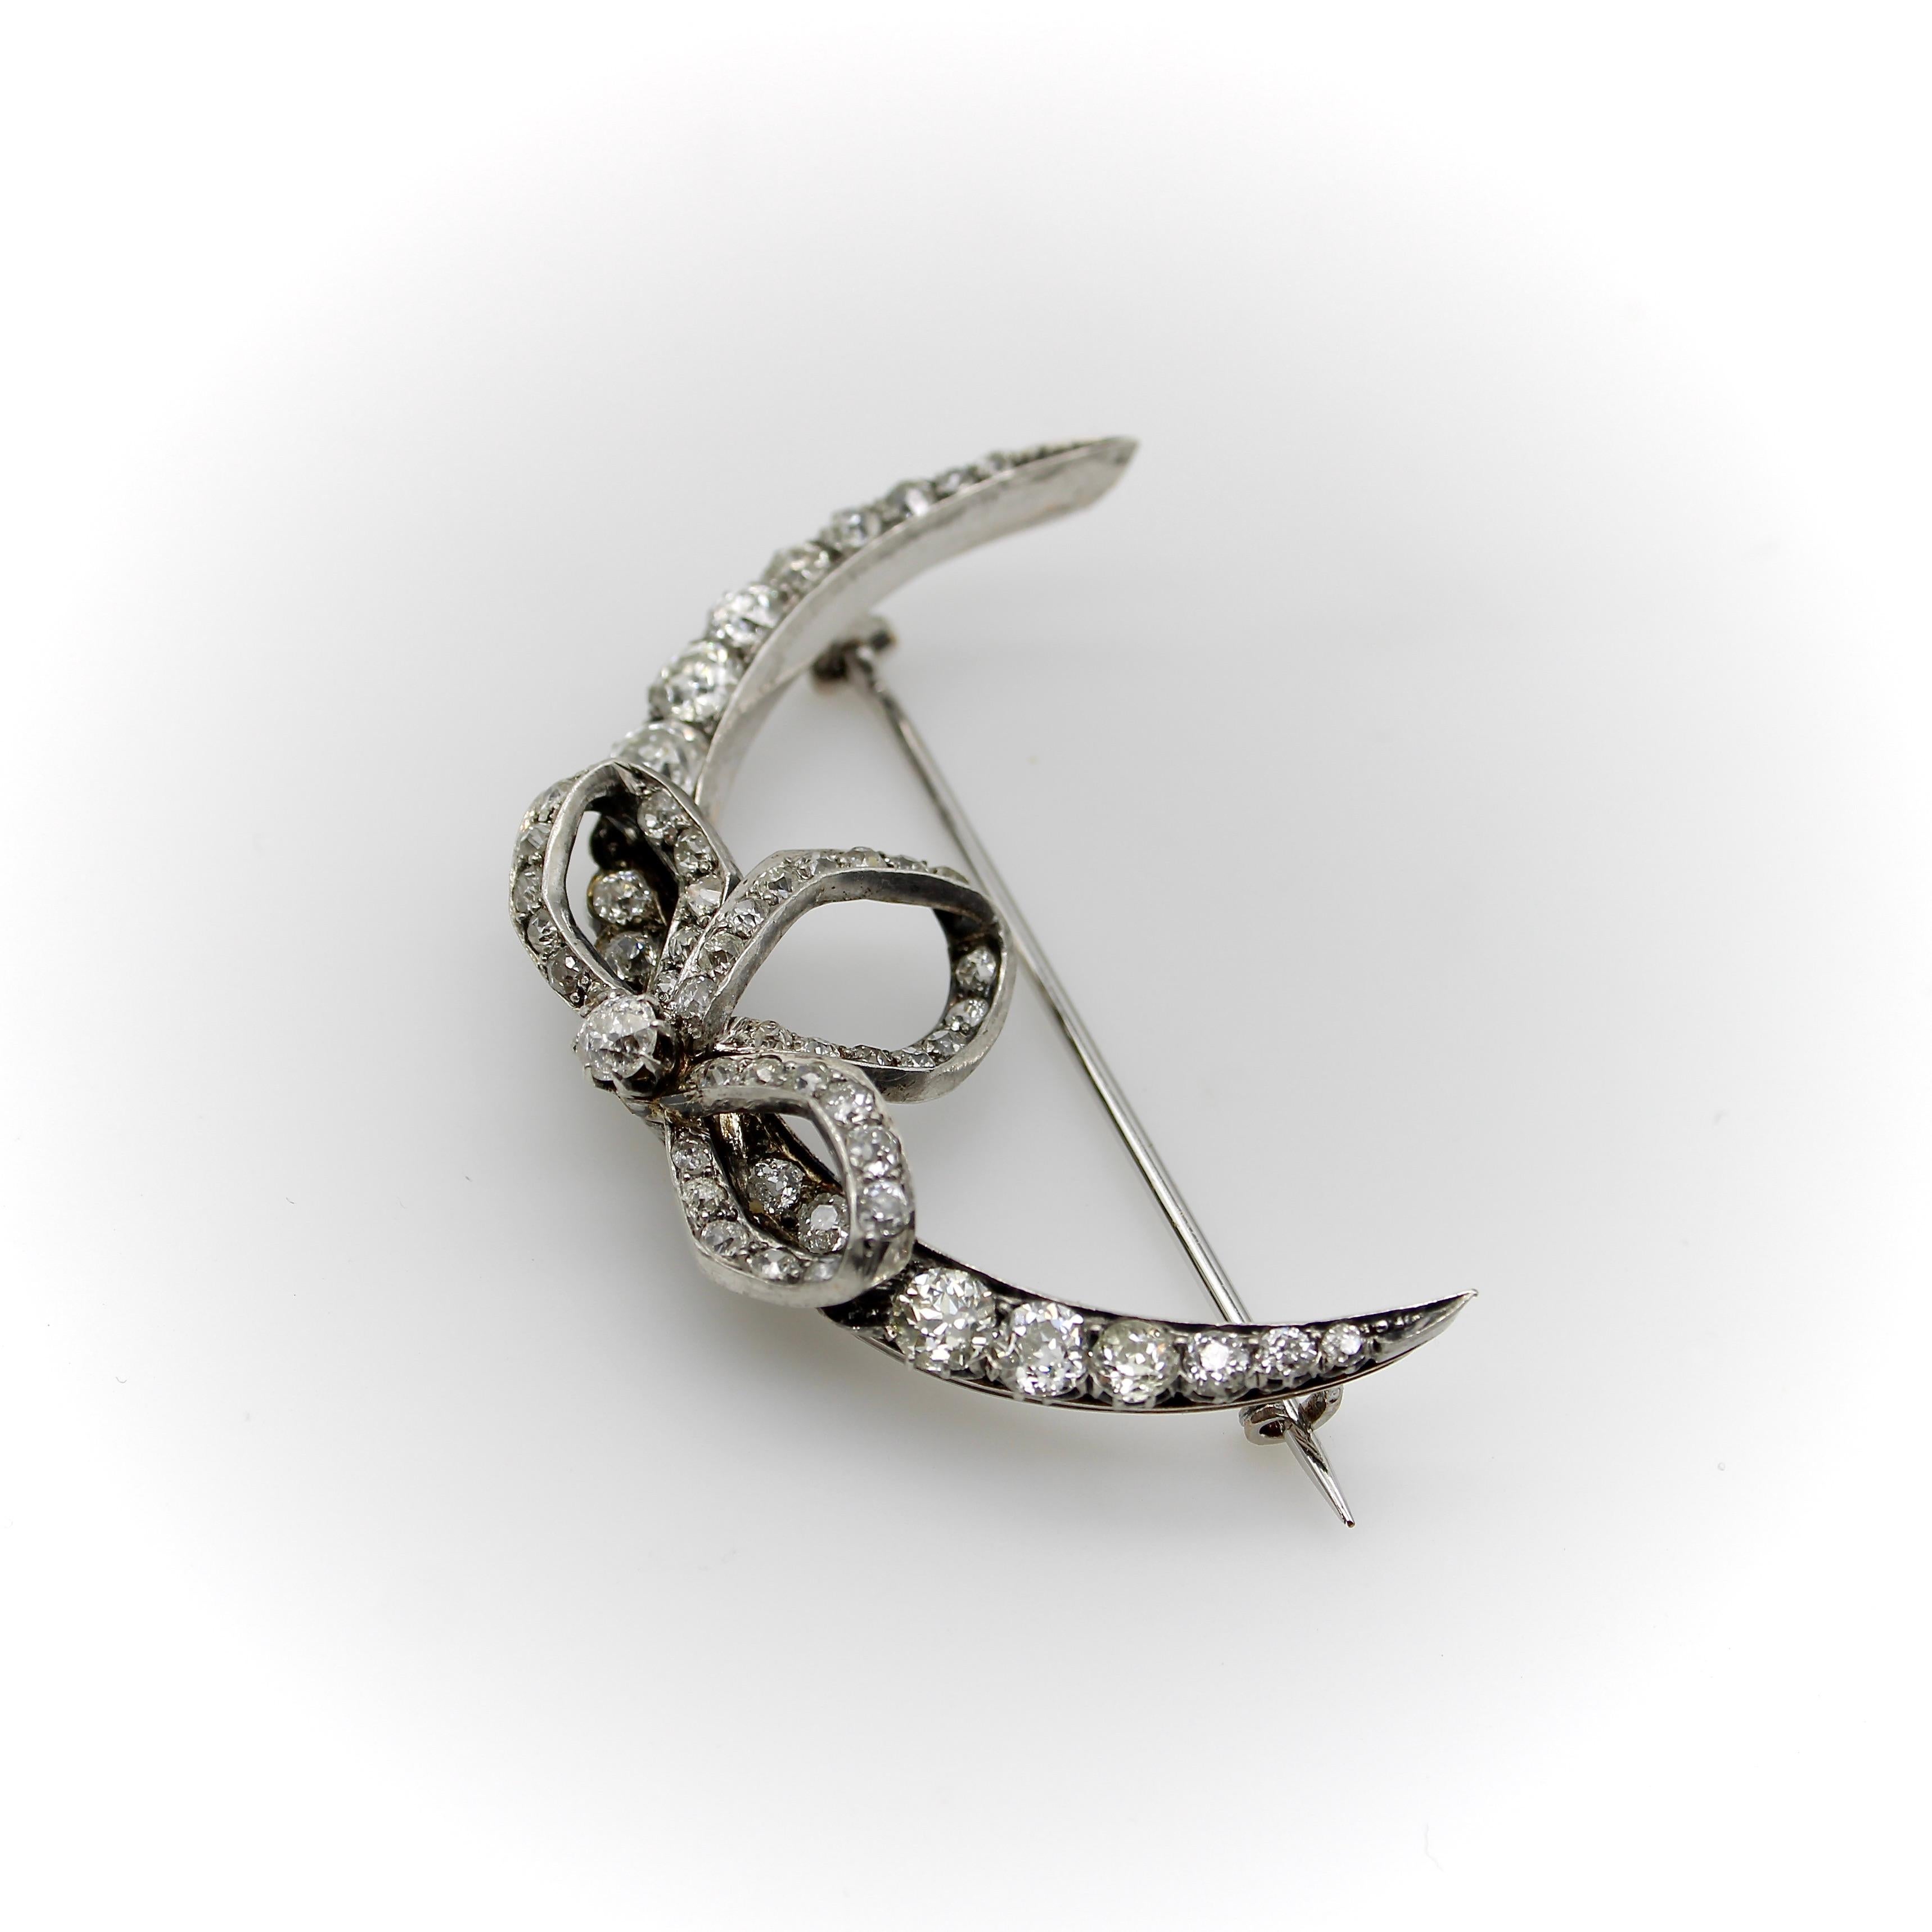 This enchanting brooch is shaped like a crescent moon adorned with a romantic bow. It is silver topped and gold backed, encrusted with 56 stunning Old Mine Cut diamonds. The brooch embodies everything we love about celestial jewelry, capturing the